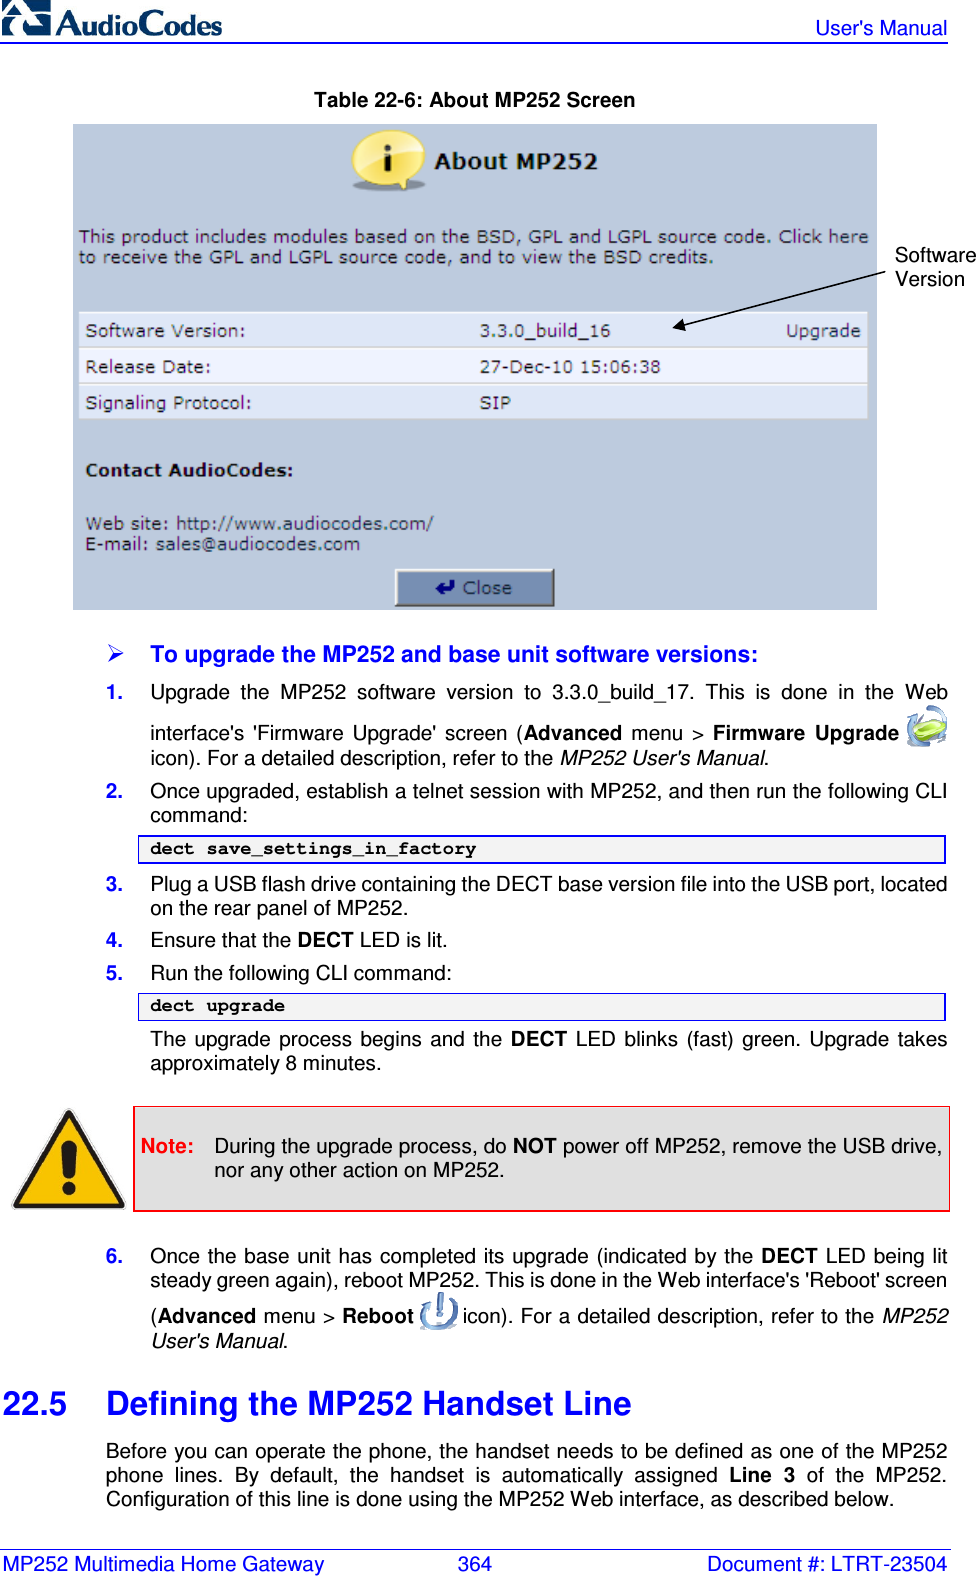 MP252 Multimedia Home Gateway  364  Document #: LTRT-23504   User&apos;s Manual  Table 22-6: About MP252 Screen   To upgrade the MP252 and base unit software versions: 1.  Upgrade  the  MP252  software  version  to  3.3.0_build_17.  This  is  done  in  the  Web interface&apos;s  &apos;Firmware  Upgrade&apos;  screen  (Advanced  menu  &gt;  Firmware  Upgrade   icon). For a detailed description, refer to the MP252 User&apos;s Manual. 2.  Once upgraded, establish a telnet session with MP252, and then run the following CLI command: dect save_settings_in_factory 3.  Plug a USB flash drive containing the DECT base version file into the USB port, located on the rear panel of MP252. 4.  Ensure that the DECT LED is lit.  5.  Run the following CLI command: dect upgrade The  upgrade  process  begins  and  the  DECT LED  blinks  (fast)  green.  Upgrade  takes approximately 8 minutes.    Note:  During the upgrade process, do NOT power off MP252, remove the USB drive, nor any other action on MP252.  6.  Once the base unit has completed its upgrade (indicated by the DECT LED being lit steady green again), reboot MP252. This is done in the Web interface&apos;s &apos;Reboot&apos; screen (Advanced menu &gt; Reboot   icon). For a detailed description, refer to the MP252 User&apos;s Manual. 22.5  Defining the MP252 Handset Line  Before you can operate the phone, the handset needs to be defined as one of the MP252 phone  lines.  By  default,  the  handset  is  automatically  assigned  Line  3  of  the  MP252. Configuration of this line is done using the MP252 Web interface, as described below. Software  Version 